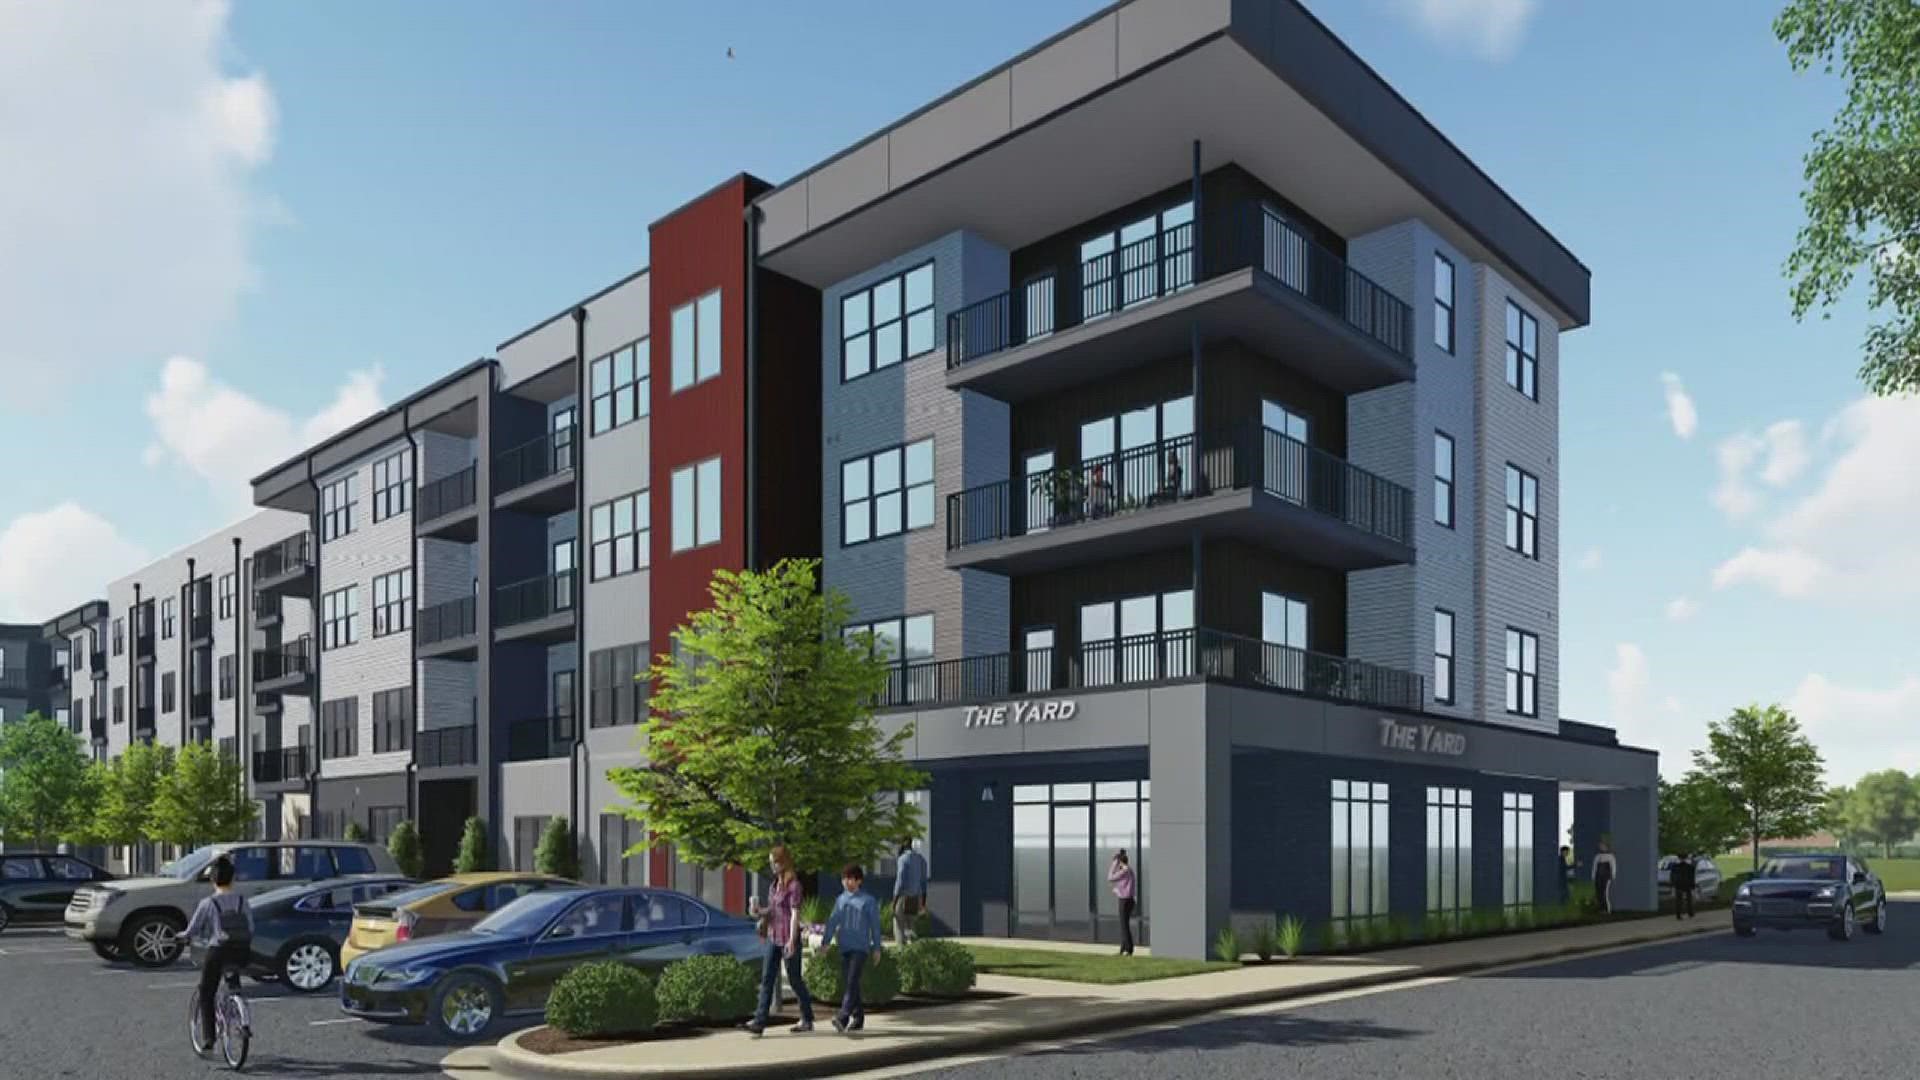 185 units will be built directly next to the YMCA in downtown Davenport